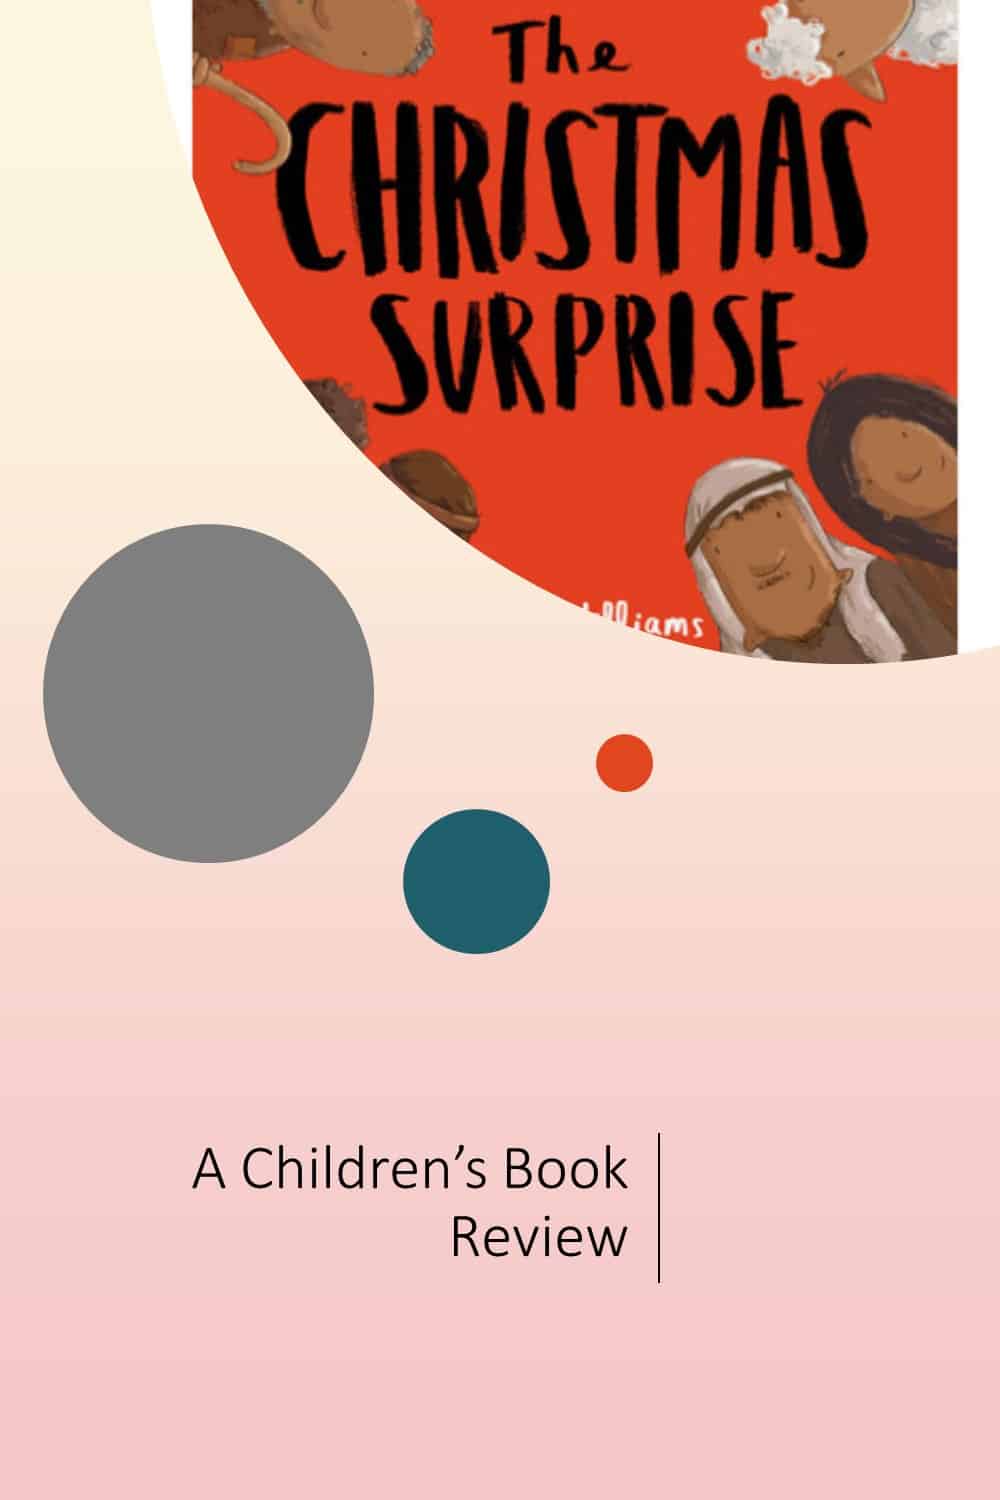 The Christmas Surprise by Steph Williams. Reviewed by Homeschooling Highway